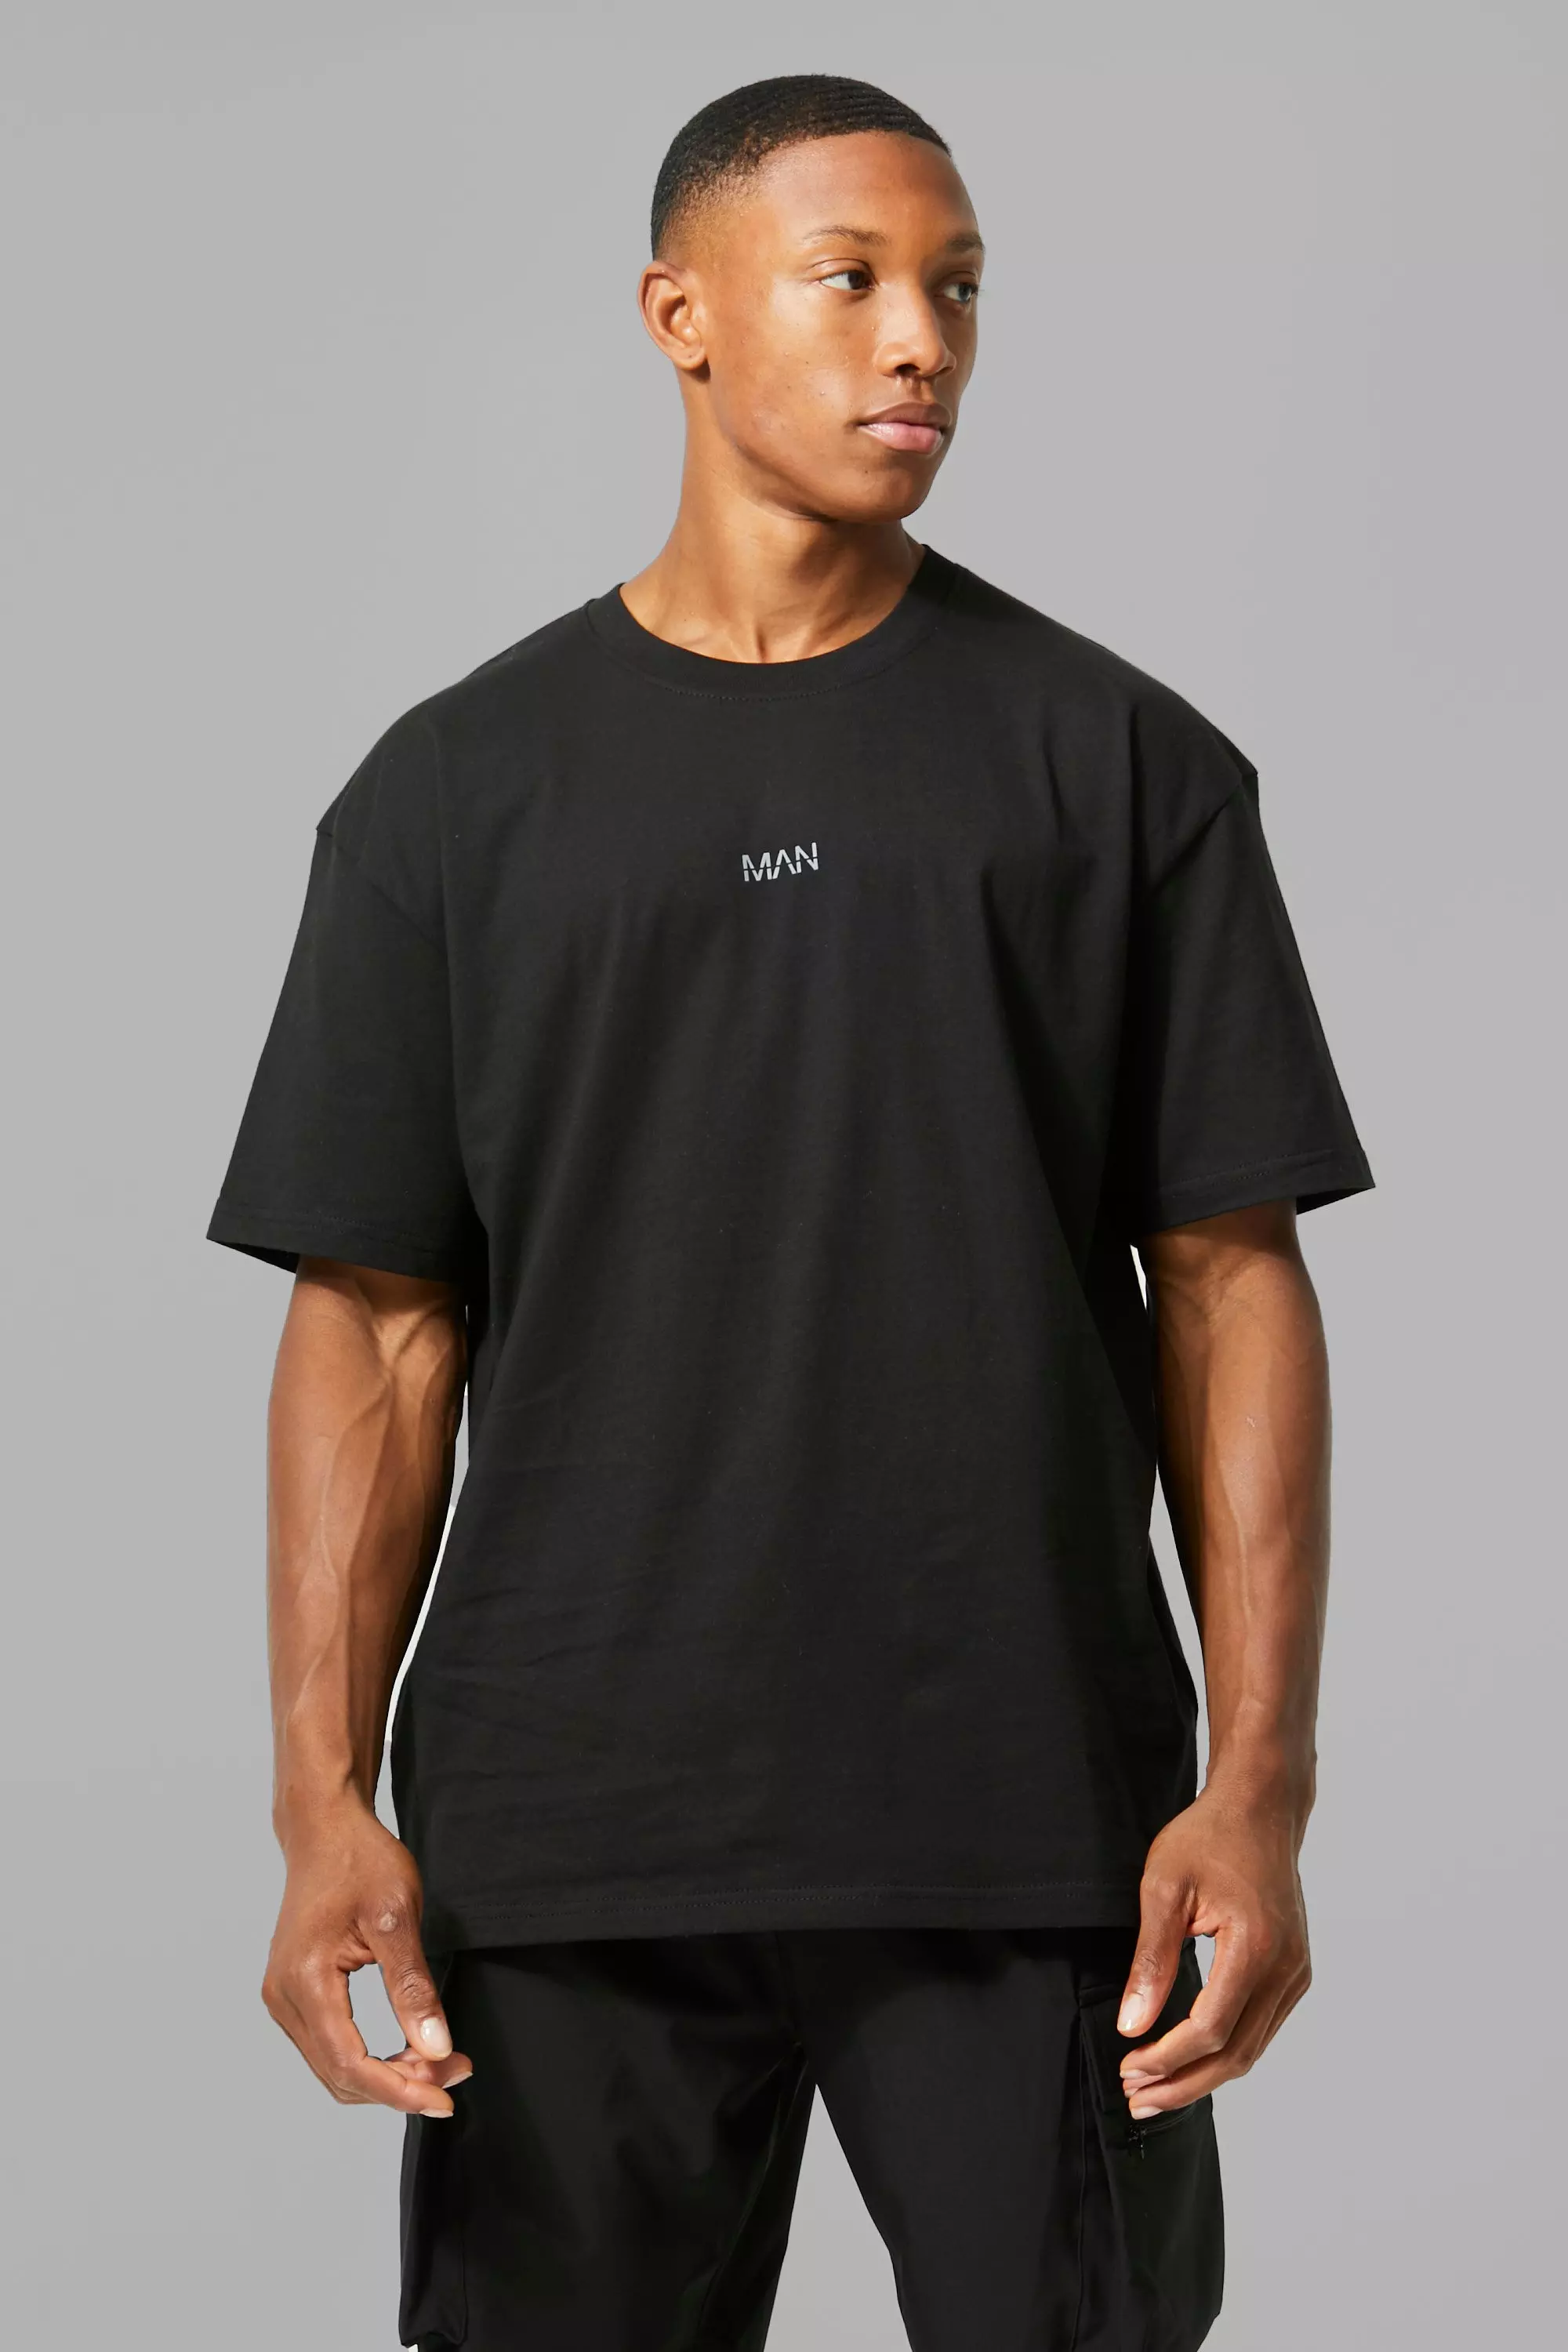 The Oversized Gym T-Shirt: A Must-Have in Your Fitness Wardrobe